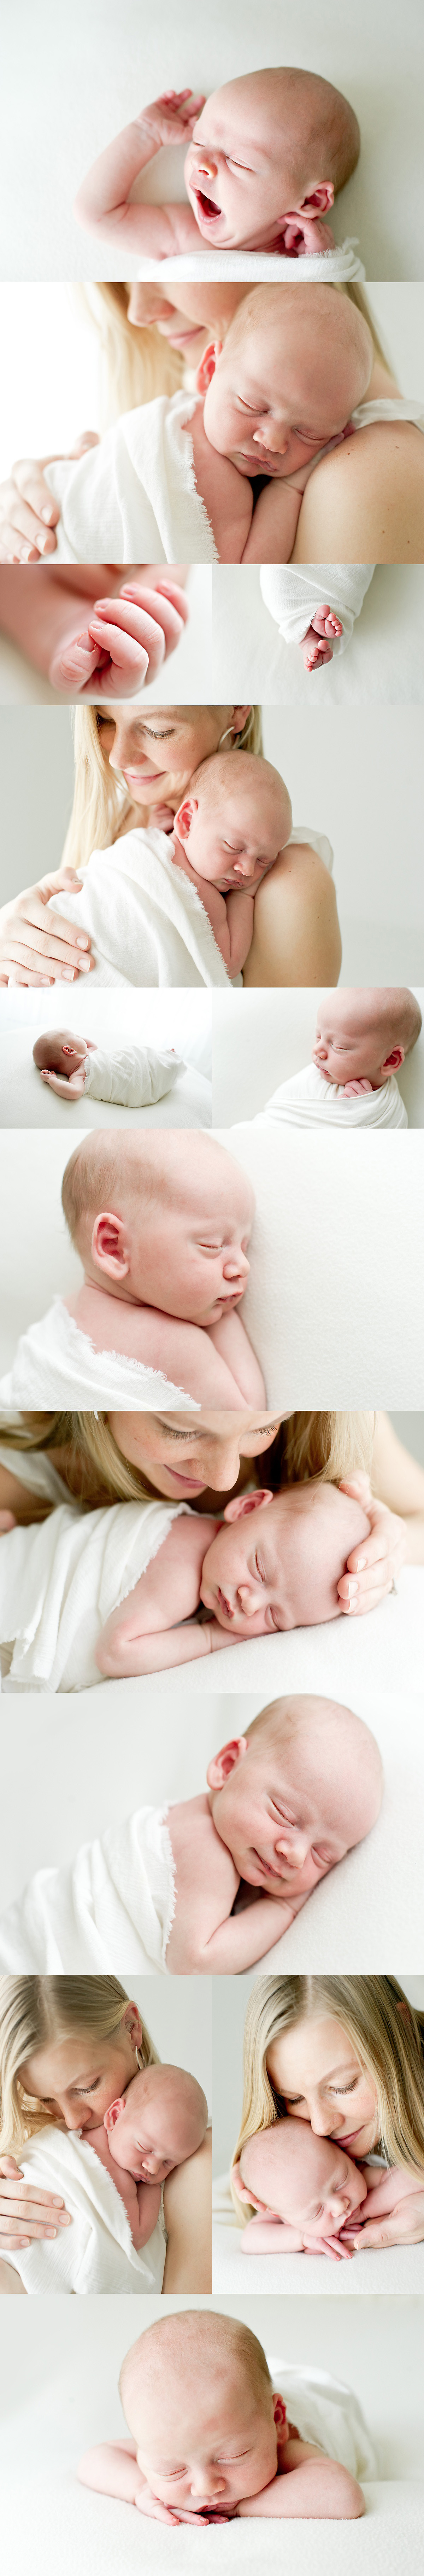 newborn baby boy sleeps in his mothers arms